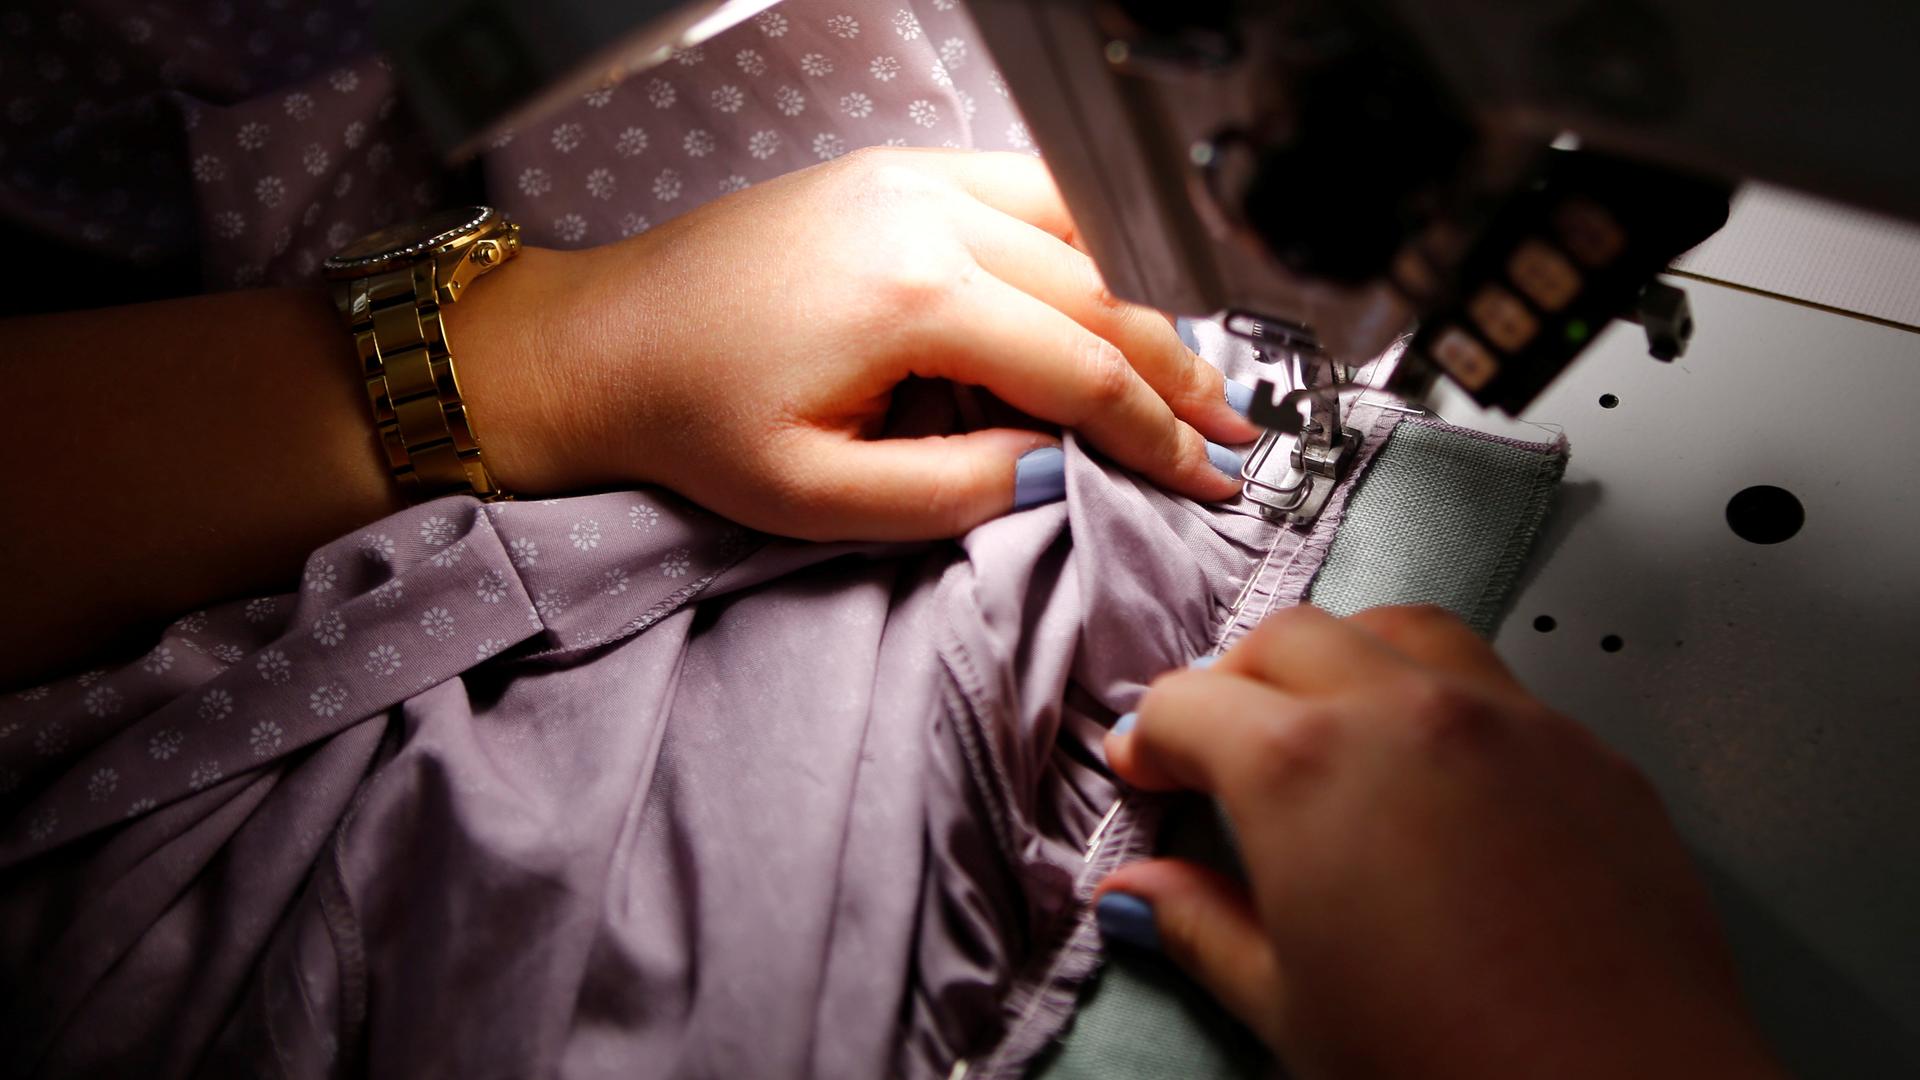 Under Sweden's new tax laws, taxes on repairs for apparel will be 50 percent lower starting Jan. 1, 2017. 